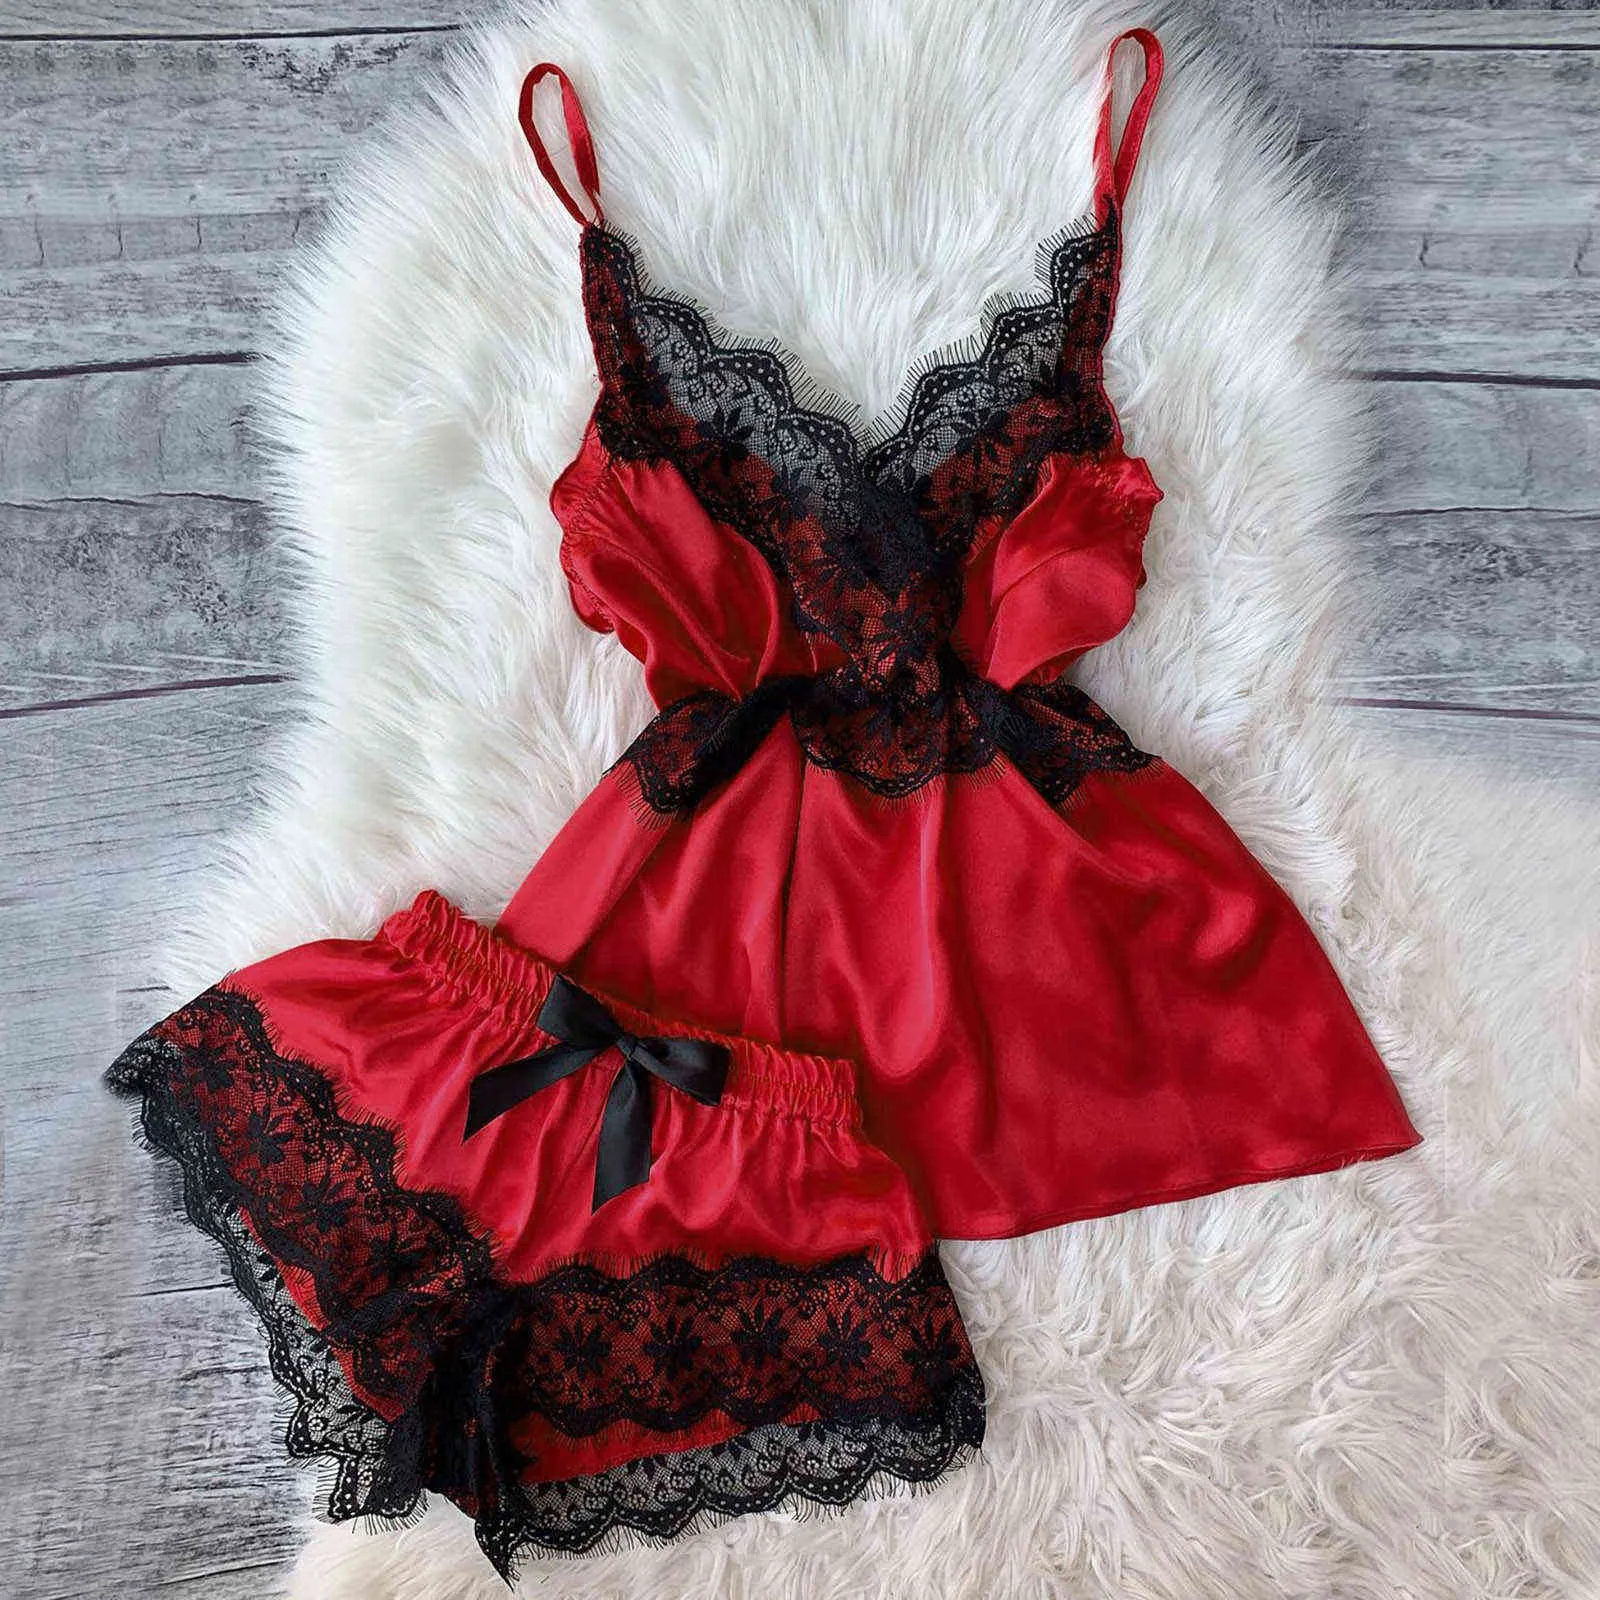 Sexy Lace Pyjama Set For Women Includes Top And Satin Shorts Babydoll  Pajamas And Homewear Lingerie L231116 From Sihuai03, $7.32